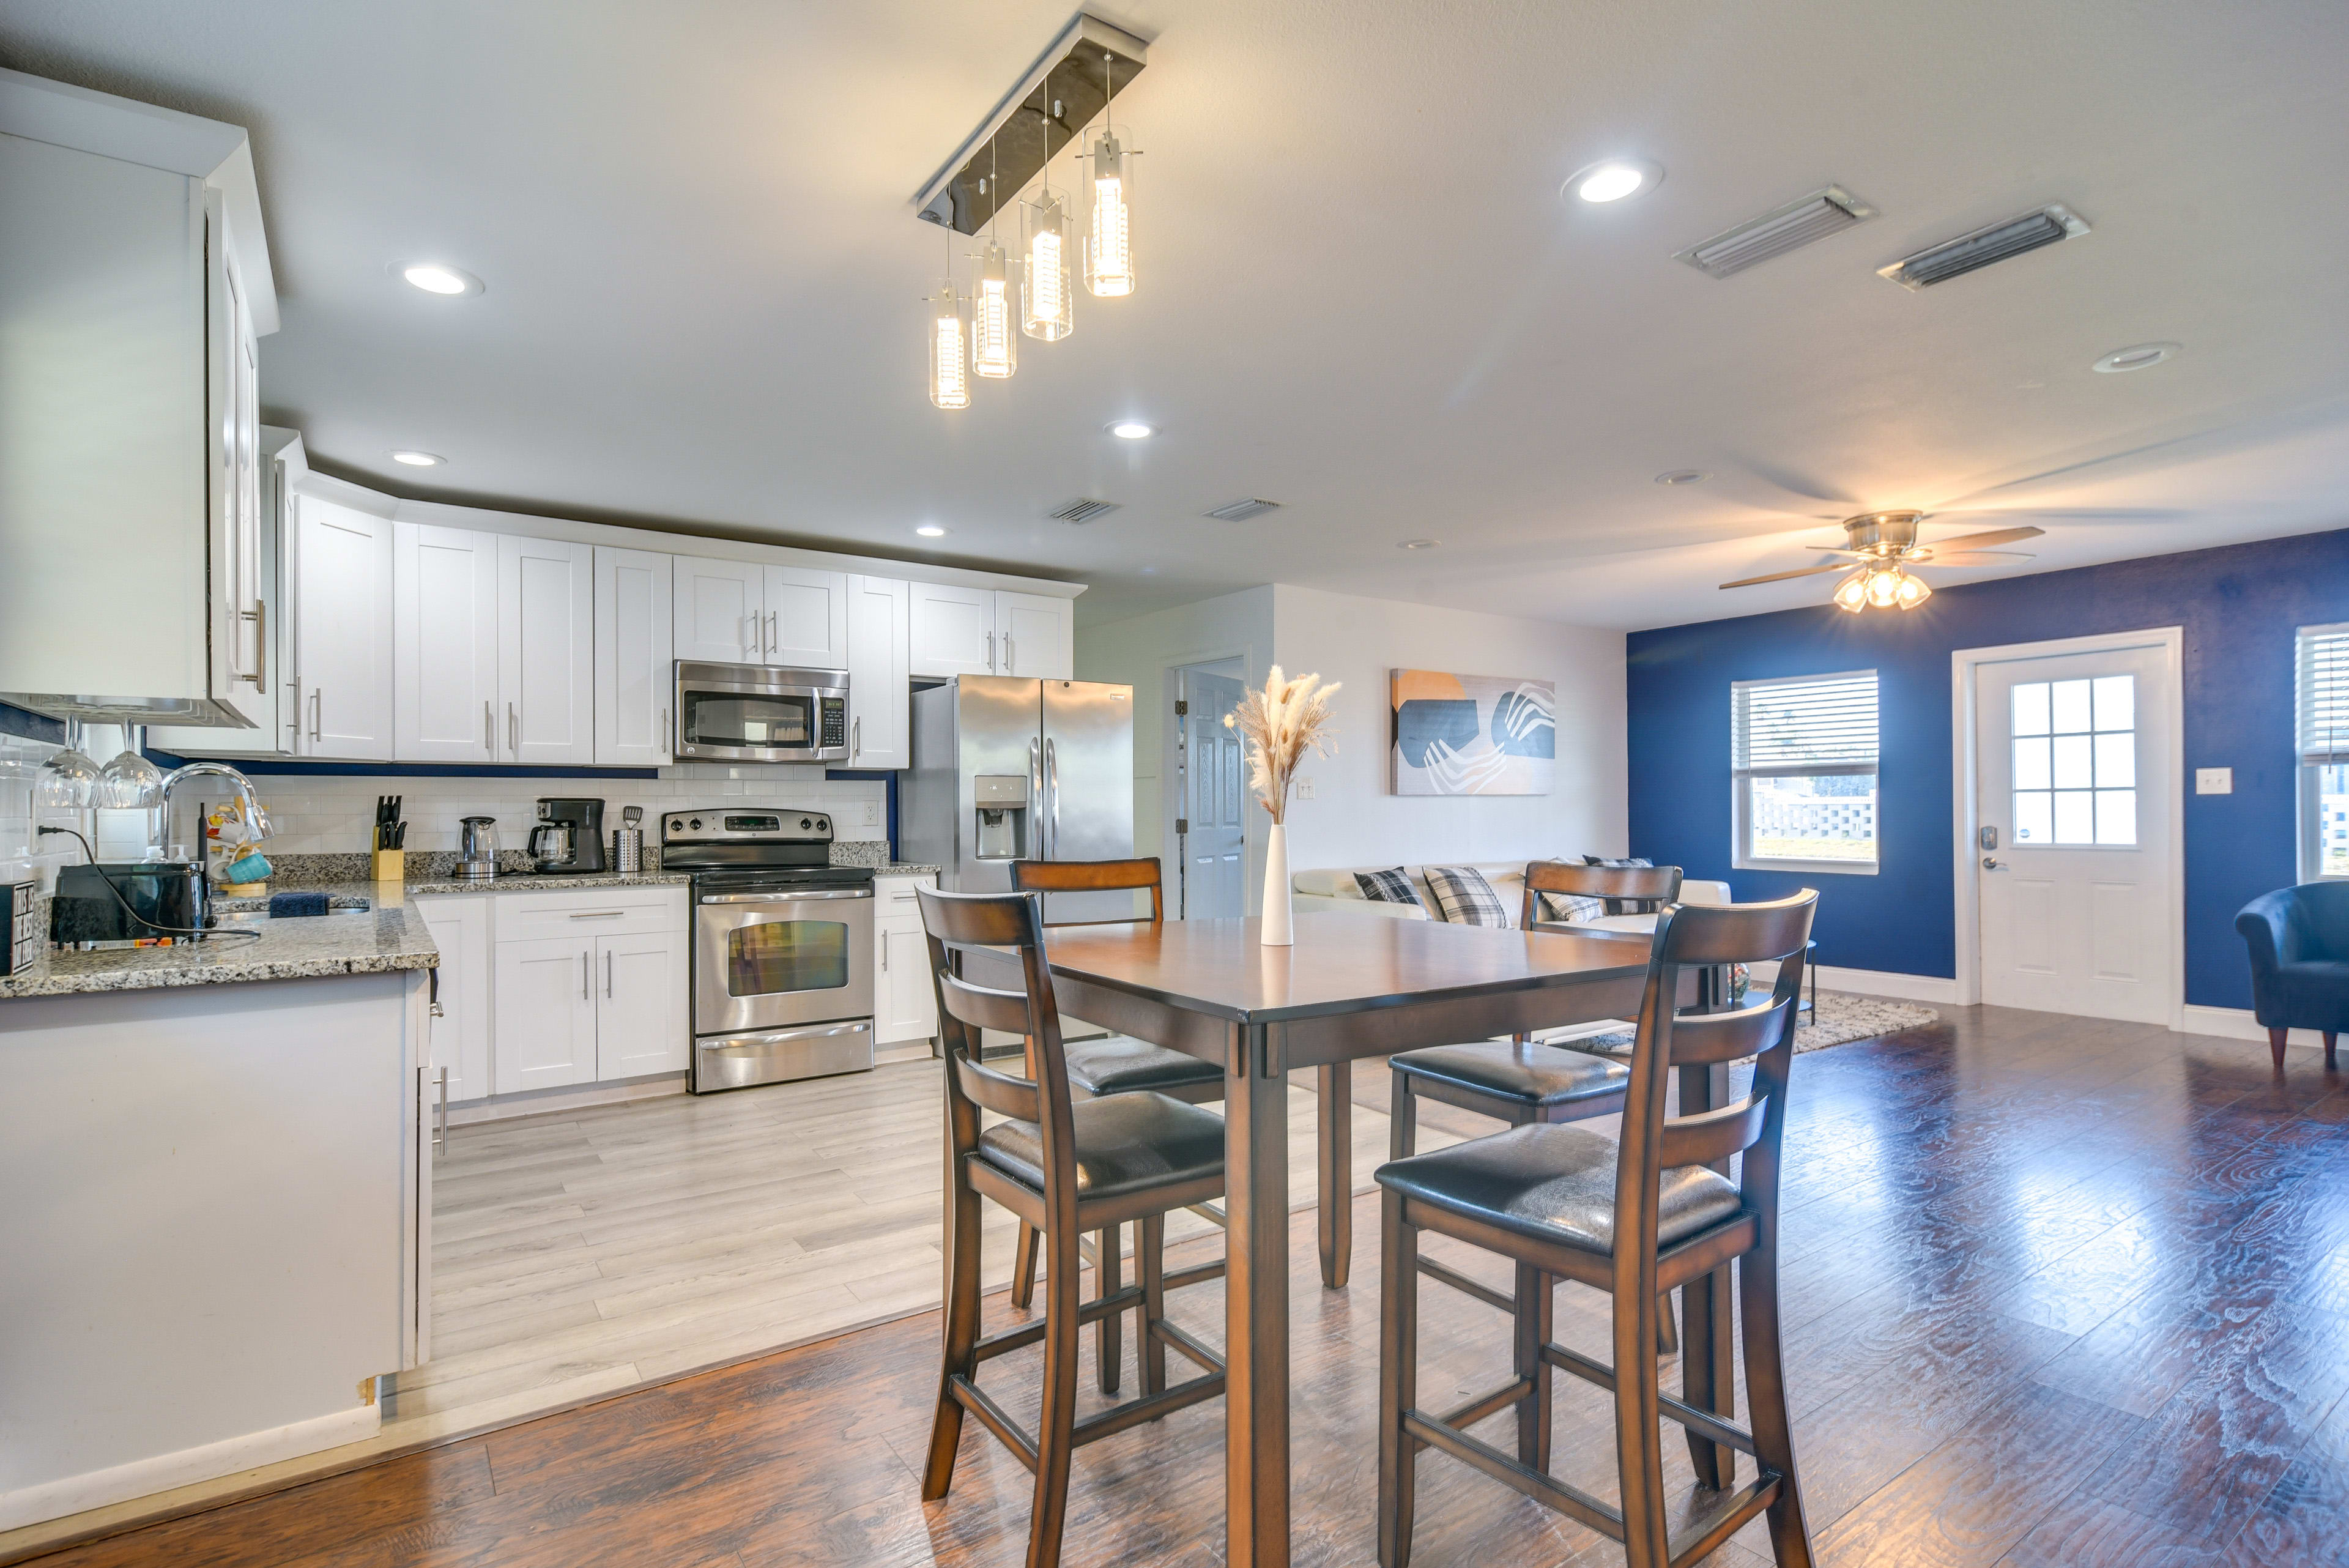 Kitchen | Dining Area | Dishware & Flatware Provided